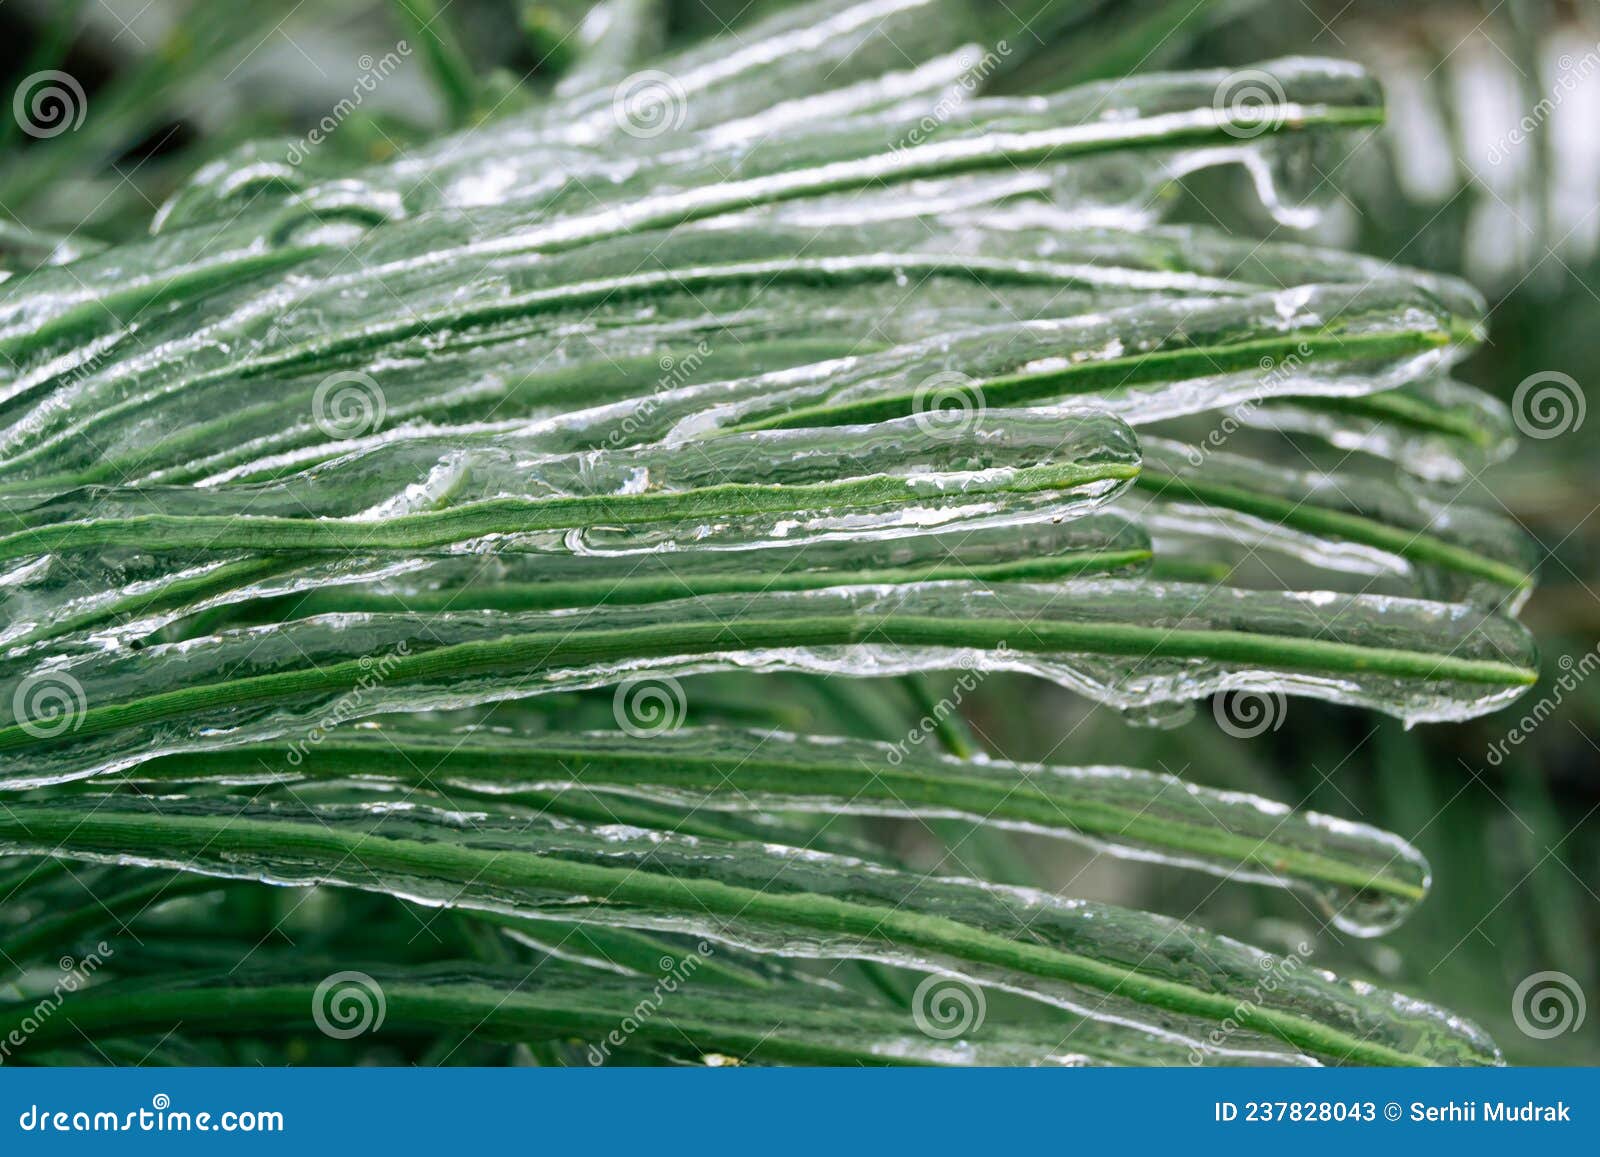 green pine needles incased in ice during ice storm